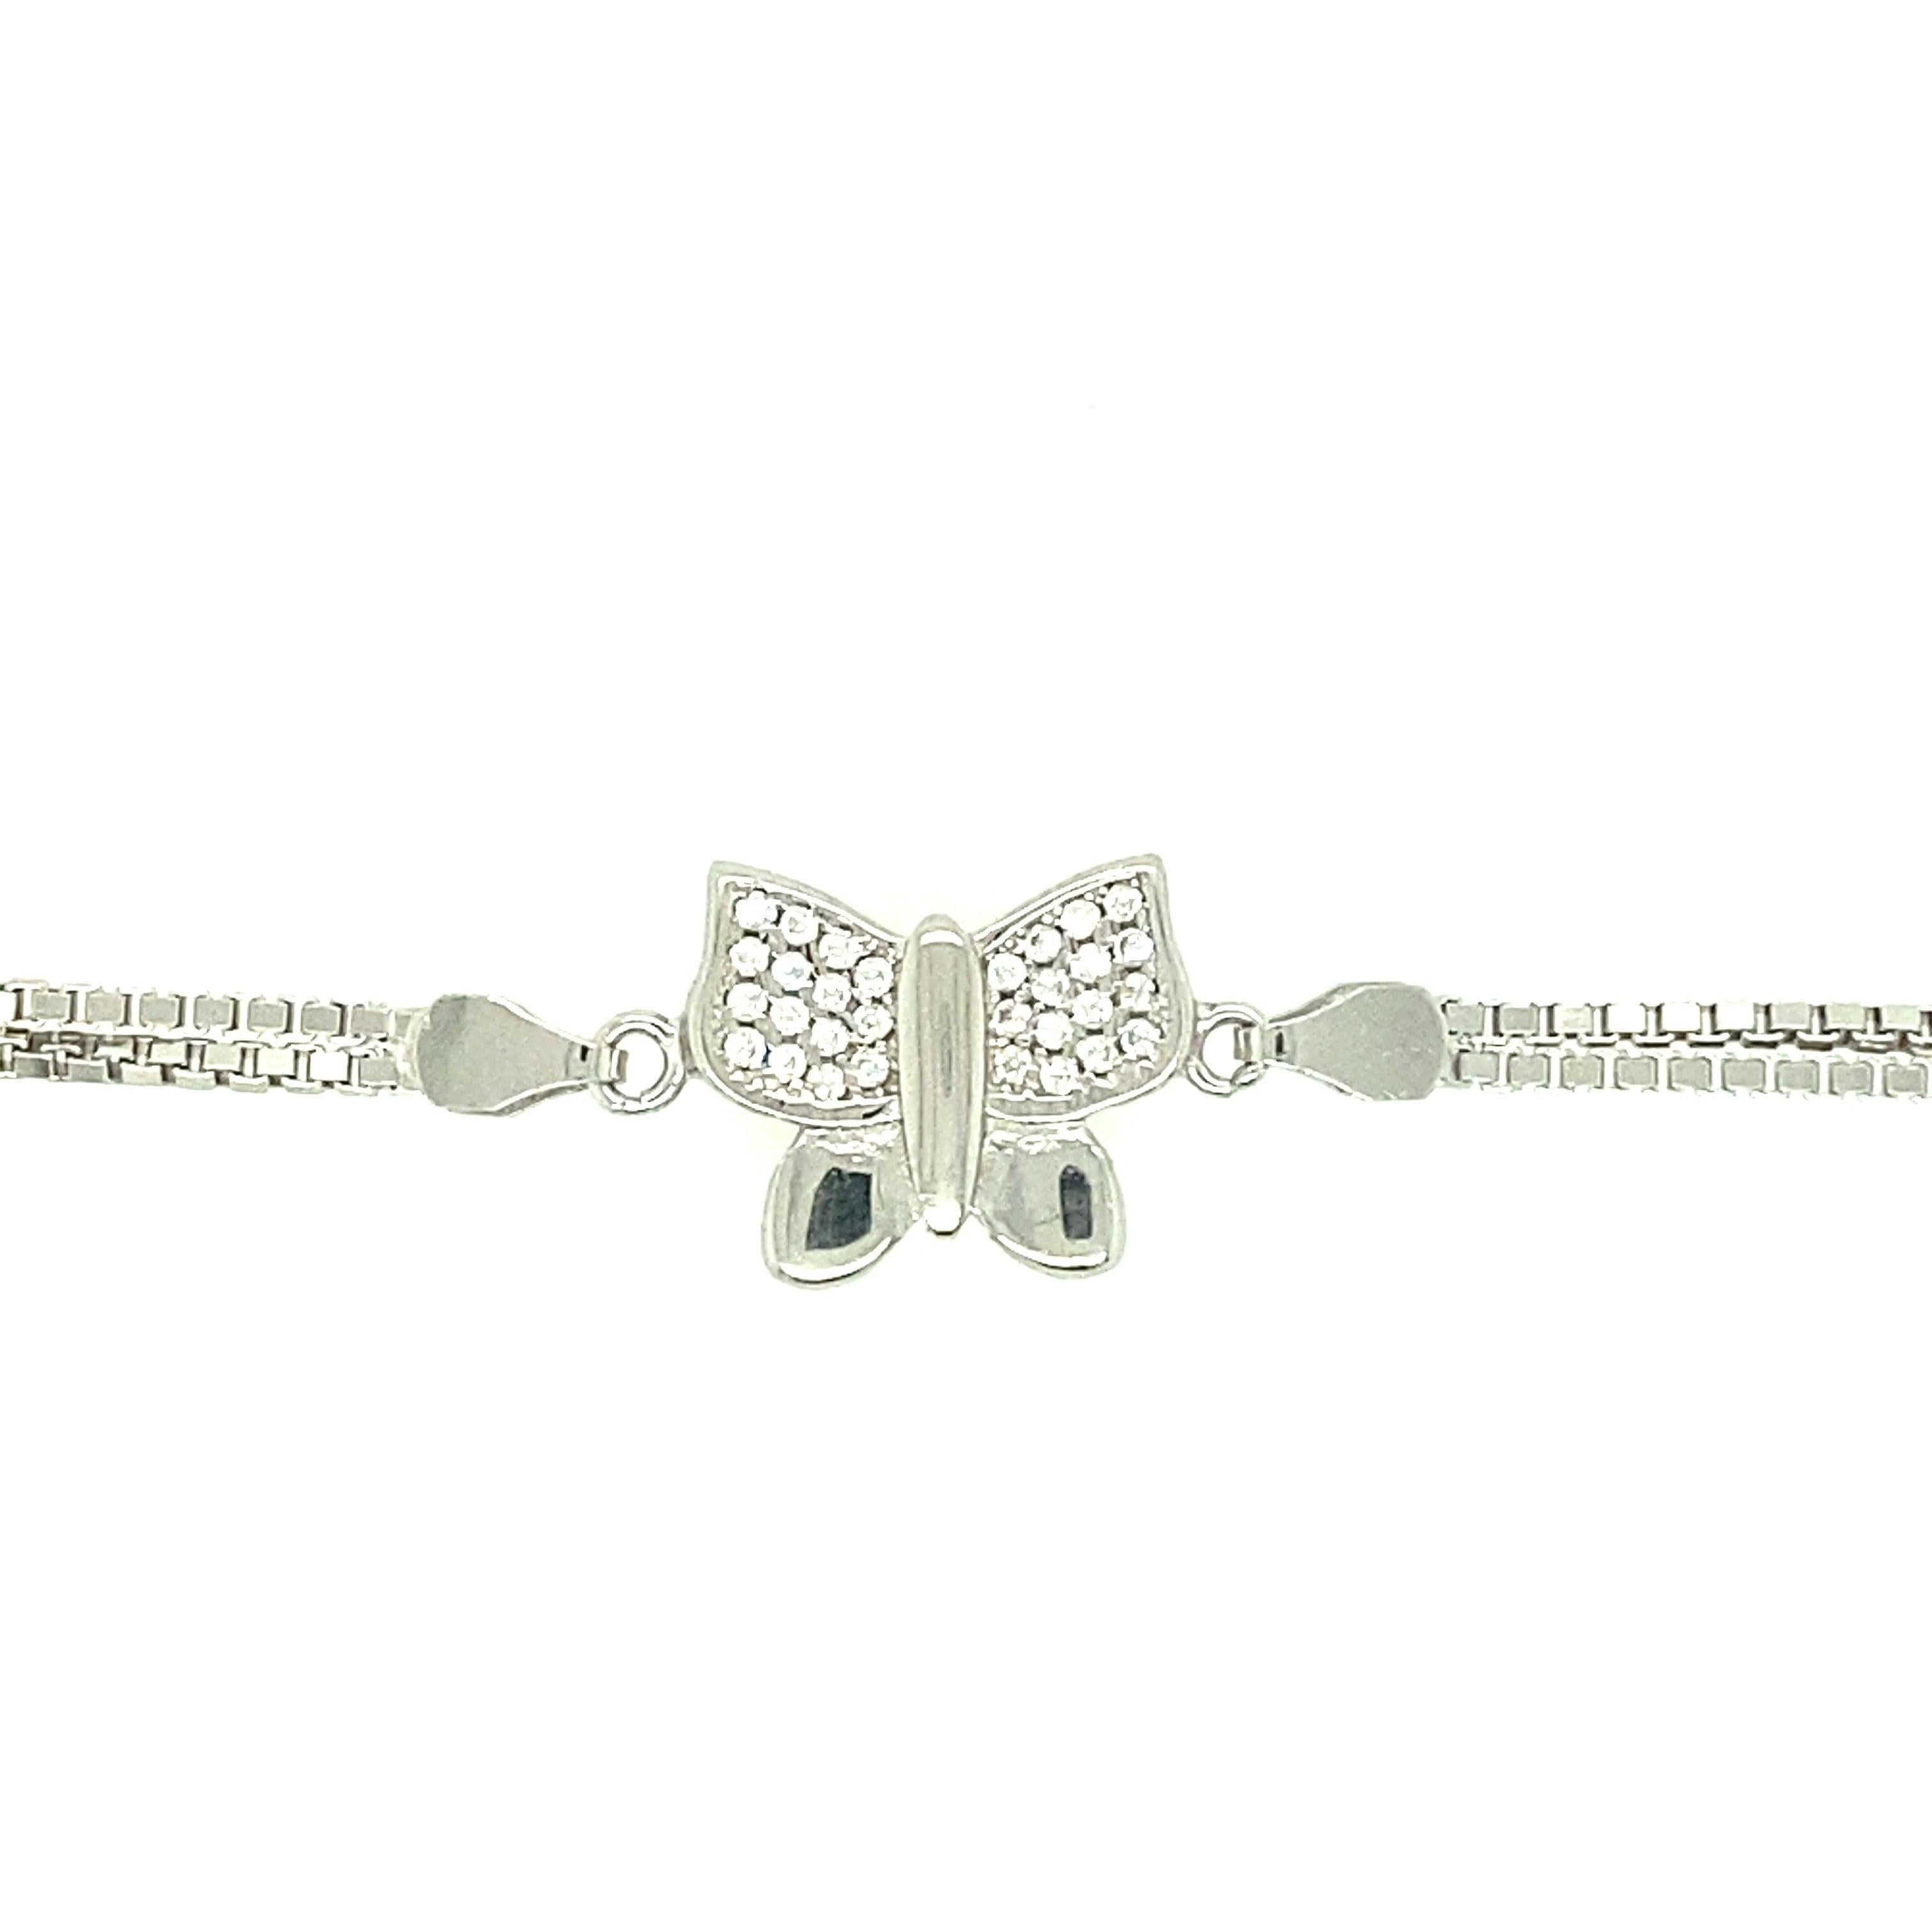 Asfour Crystal Silver Accessories Bracelet B1651 - 925 Sterling Silver